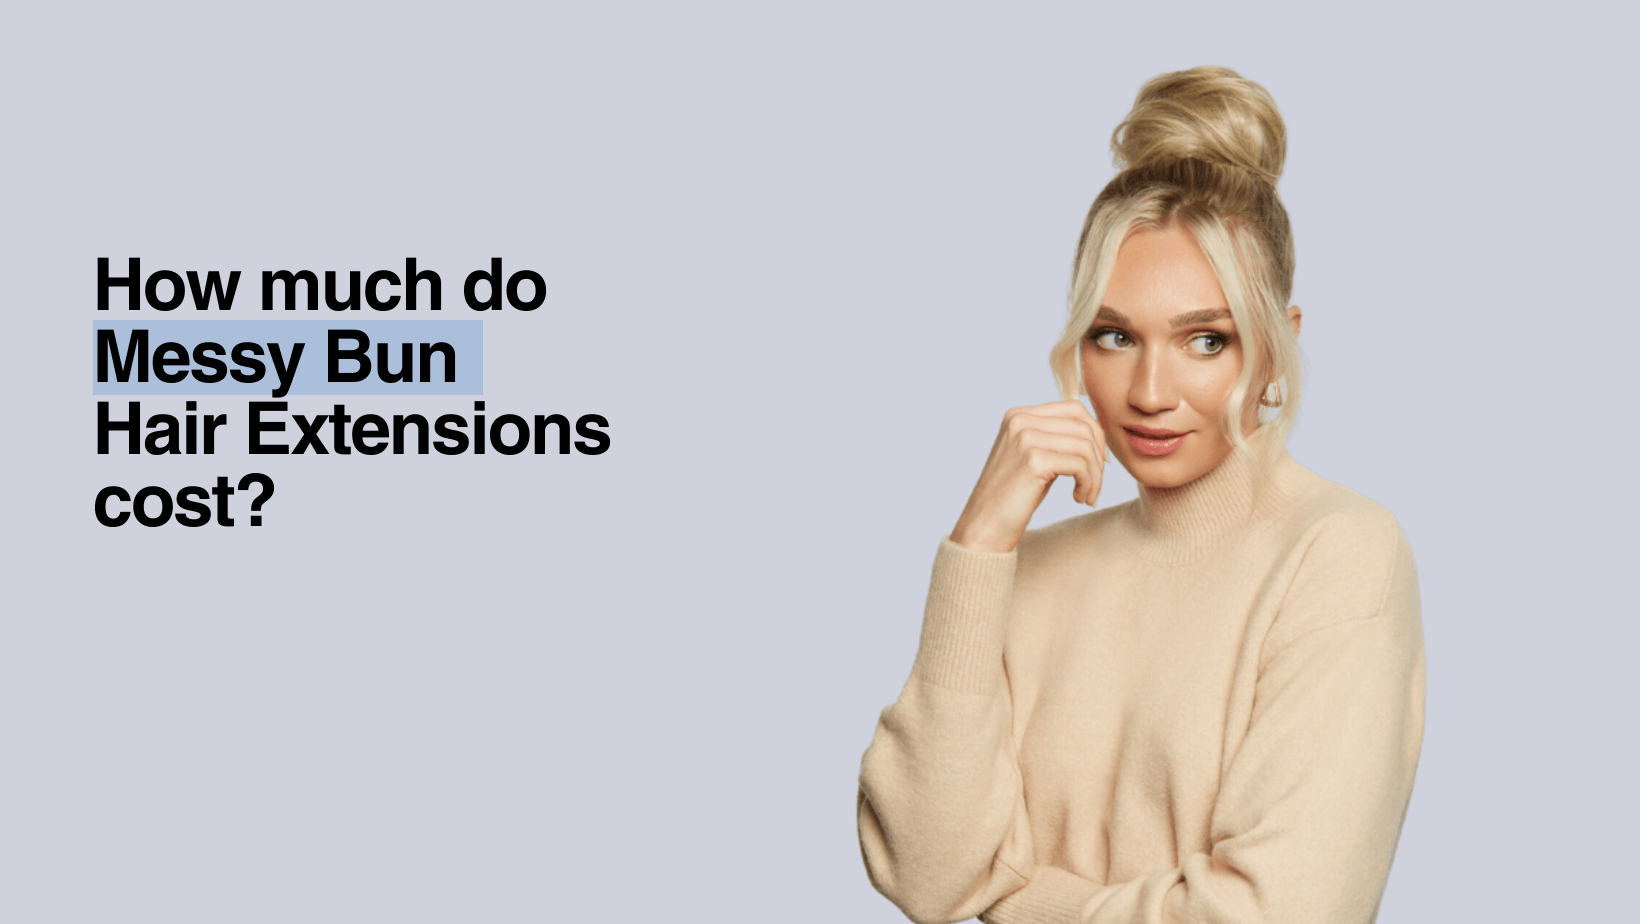 How Much Do Messy Bun Hair Extensions Cost?